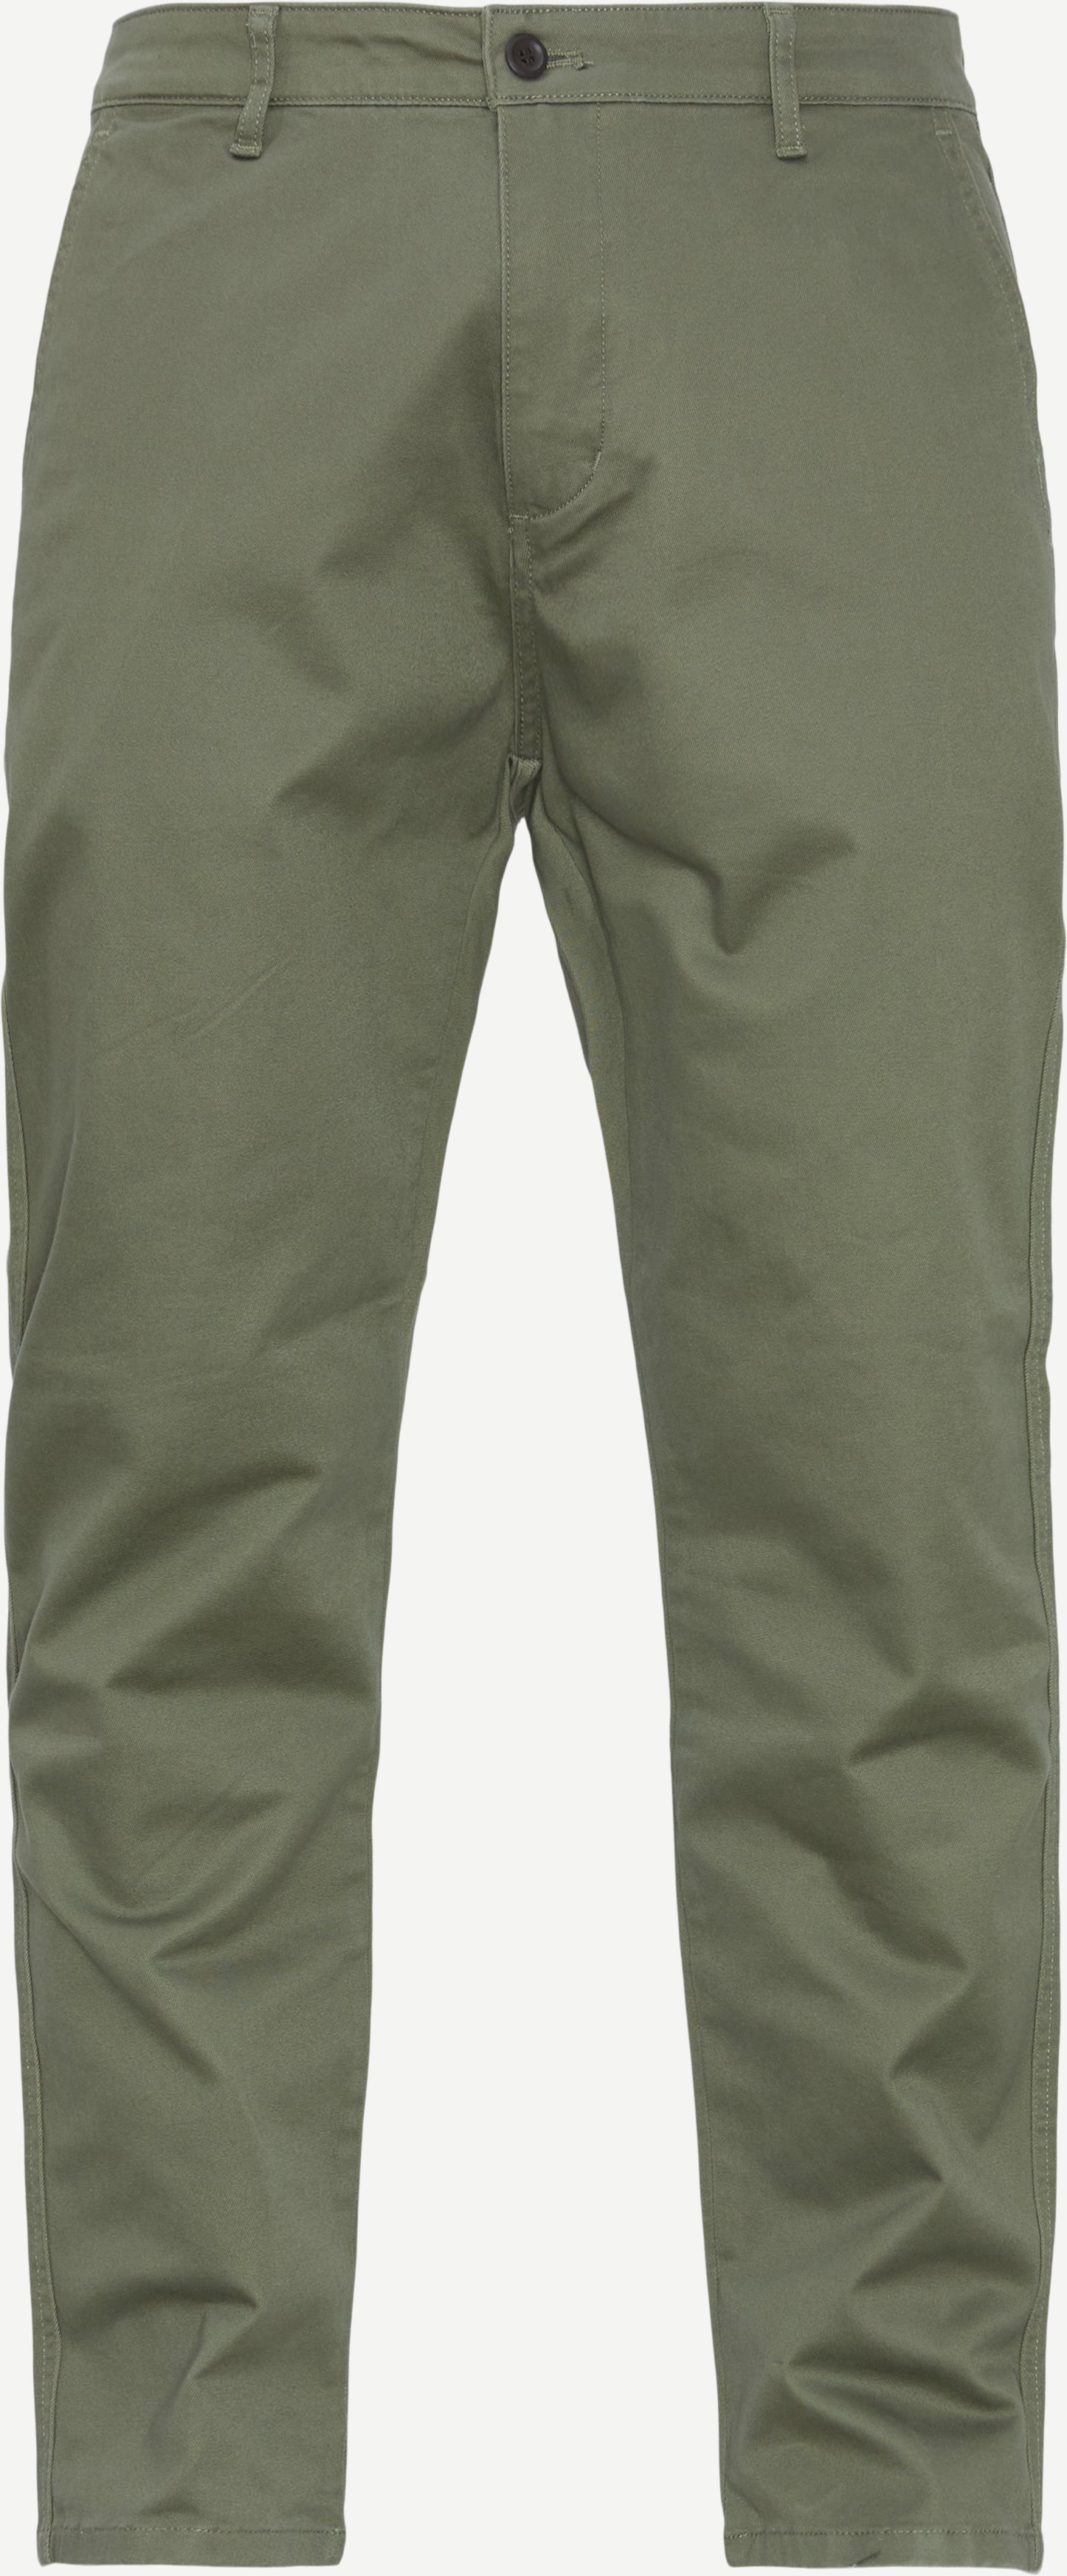 Dockers Trousers 4862 75807 Army